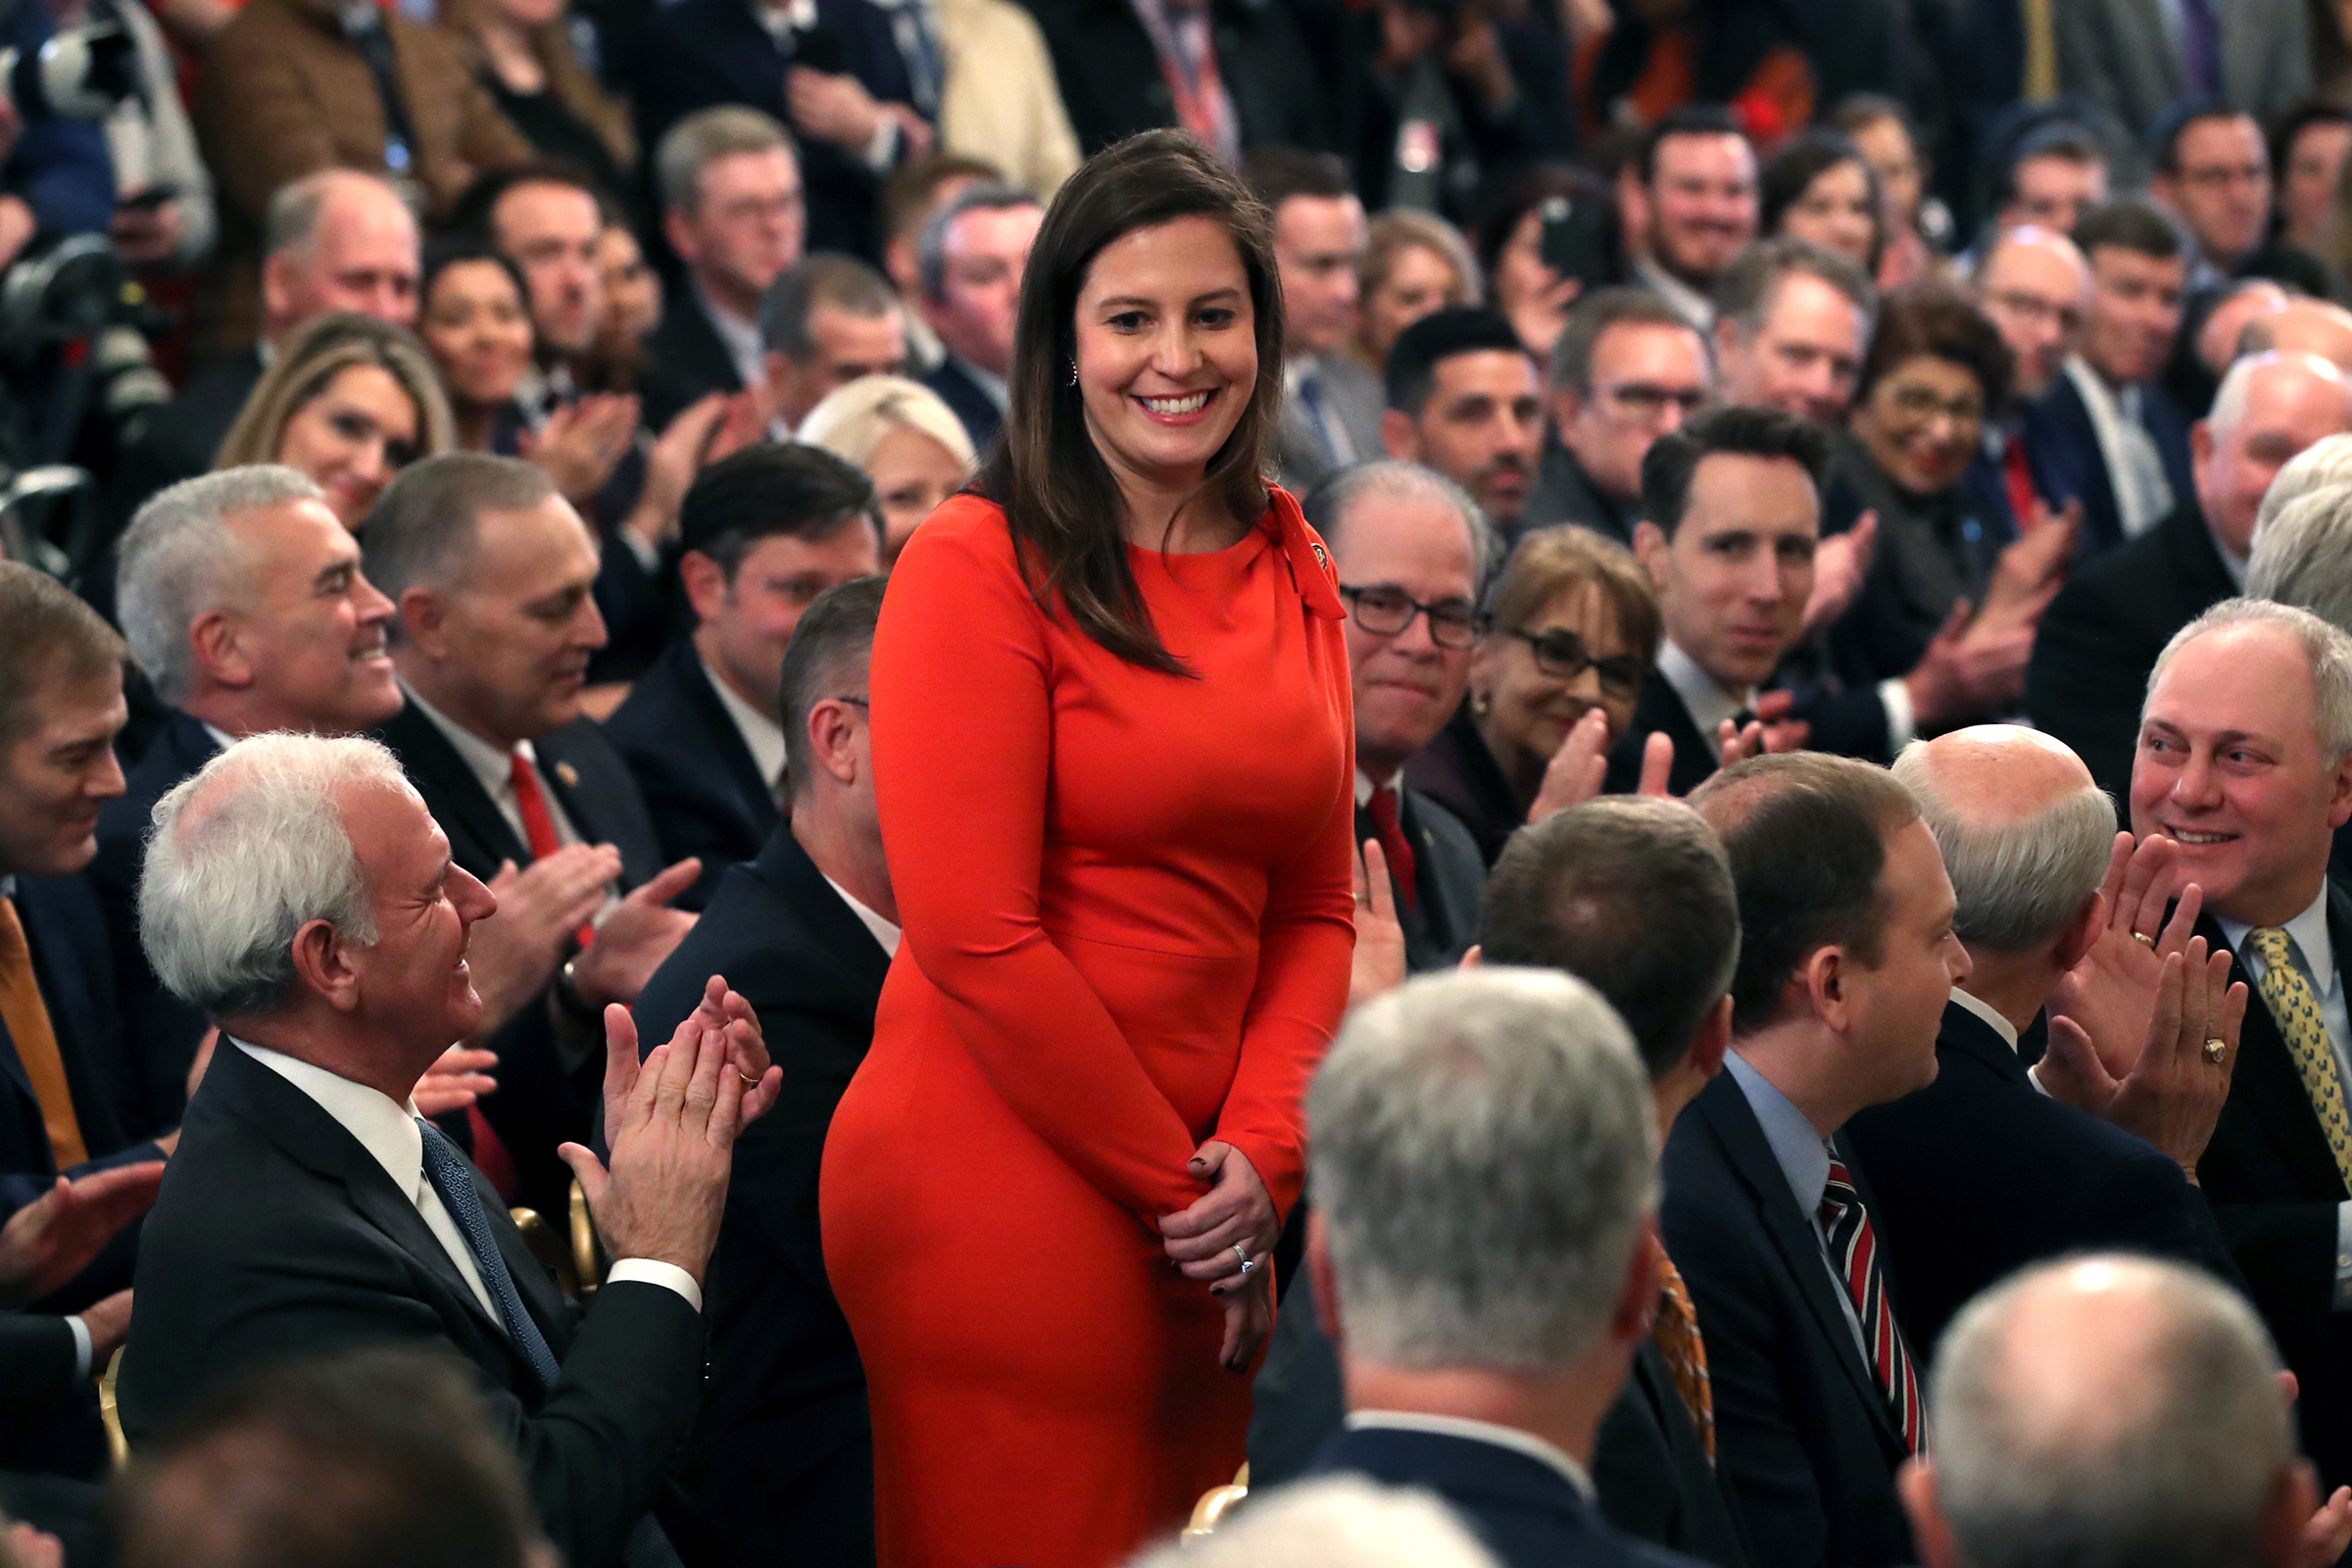 Elise Stefanik stands as she's acknowledged by former President Donald Trump as he speaks one day after the U.S. Senate acquitted on two articles of impeachment, in the East Room of the White House, Feb. 6, 2020